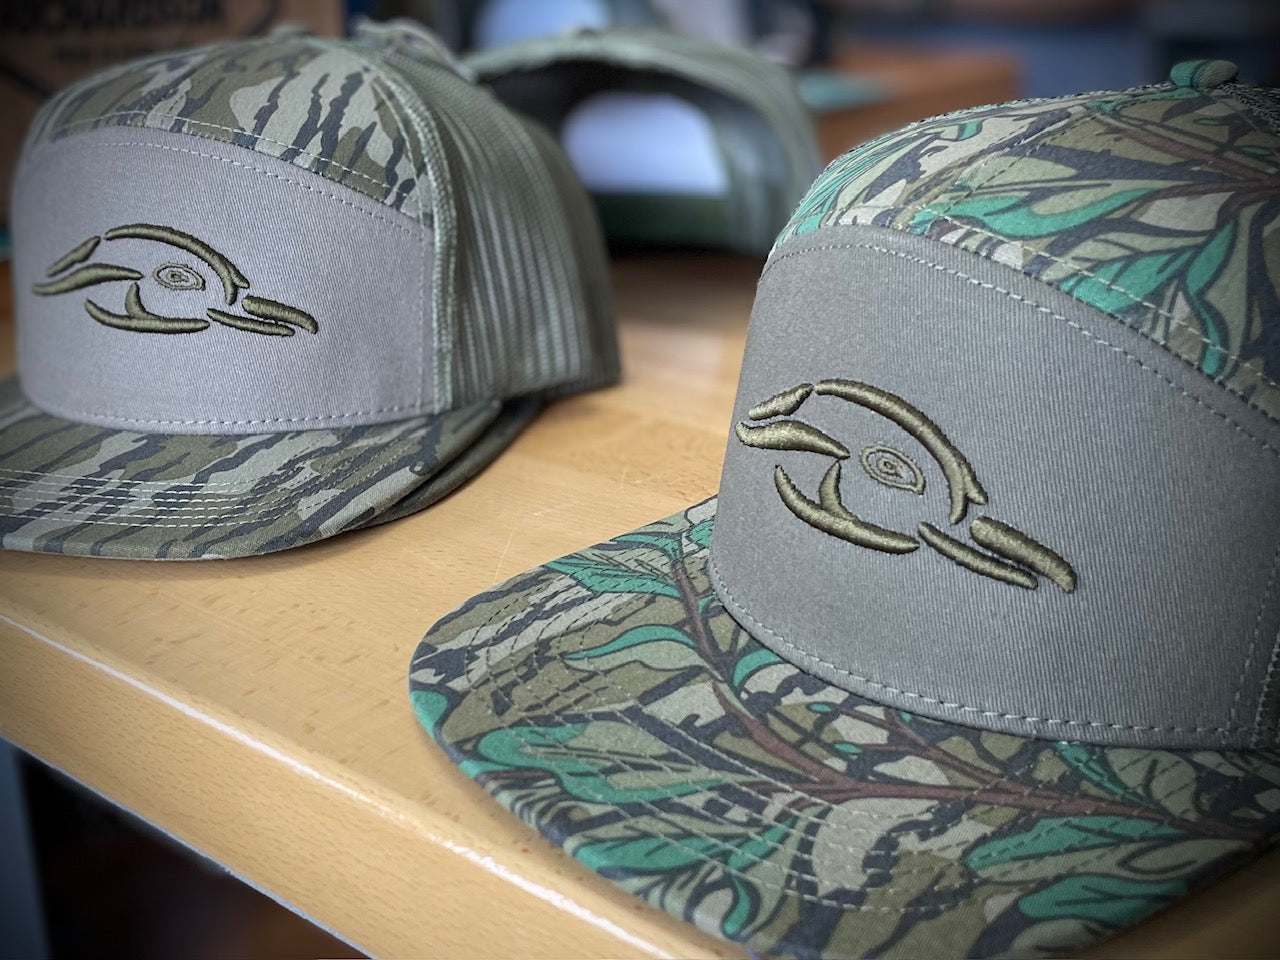 New seven panel flat bill camo hats from Low Country Comfort Company are in  stock for $25 taxes included! #dixiemade #dixiemade💜 #low